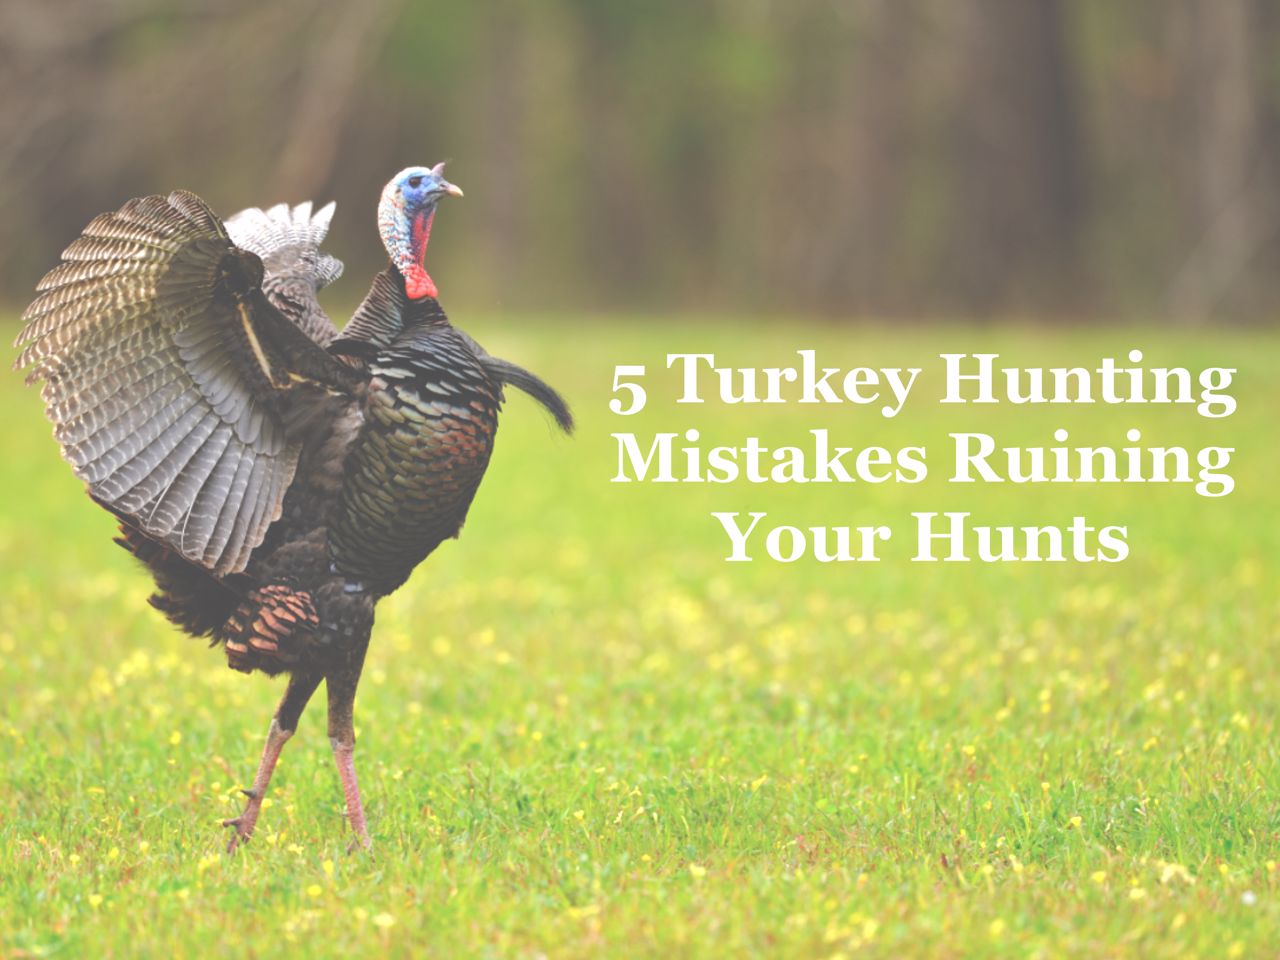 5 Turkey Hunting Mistakes Ruining Your Hunts